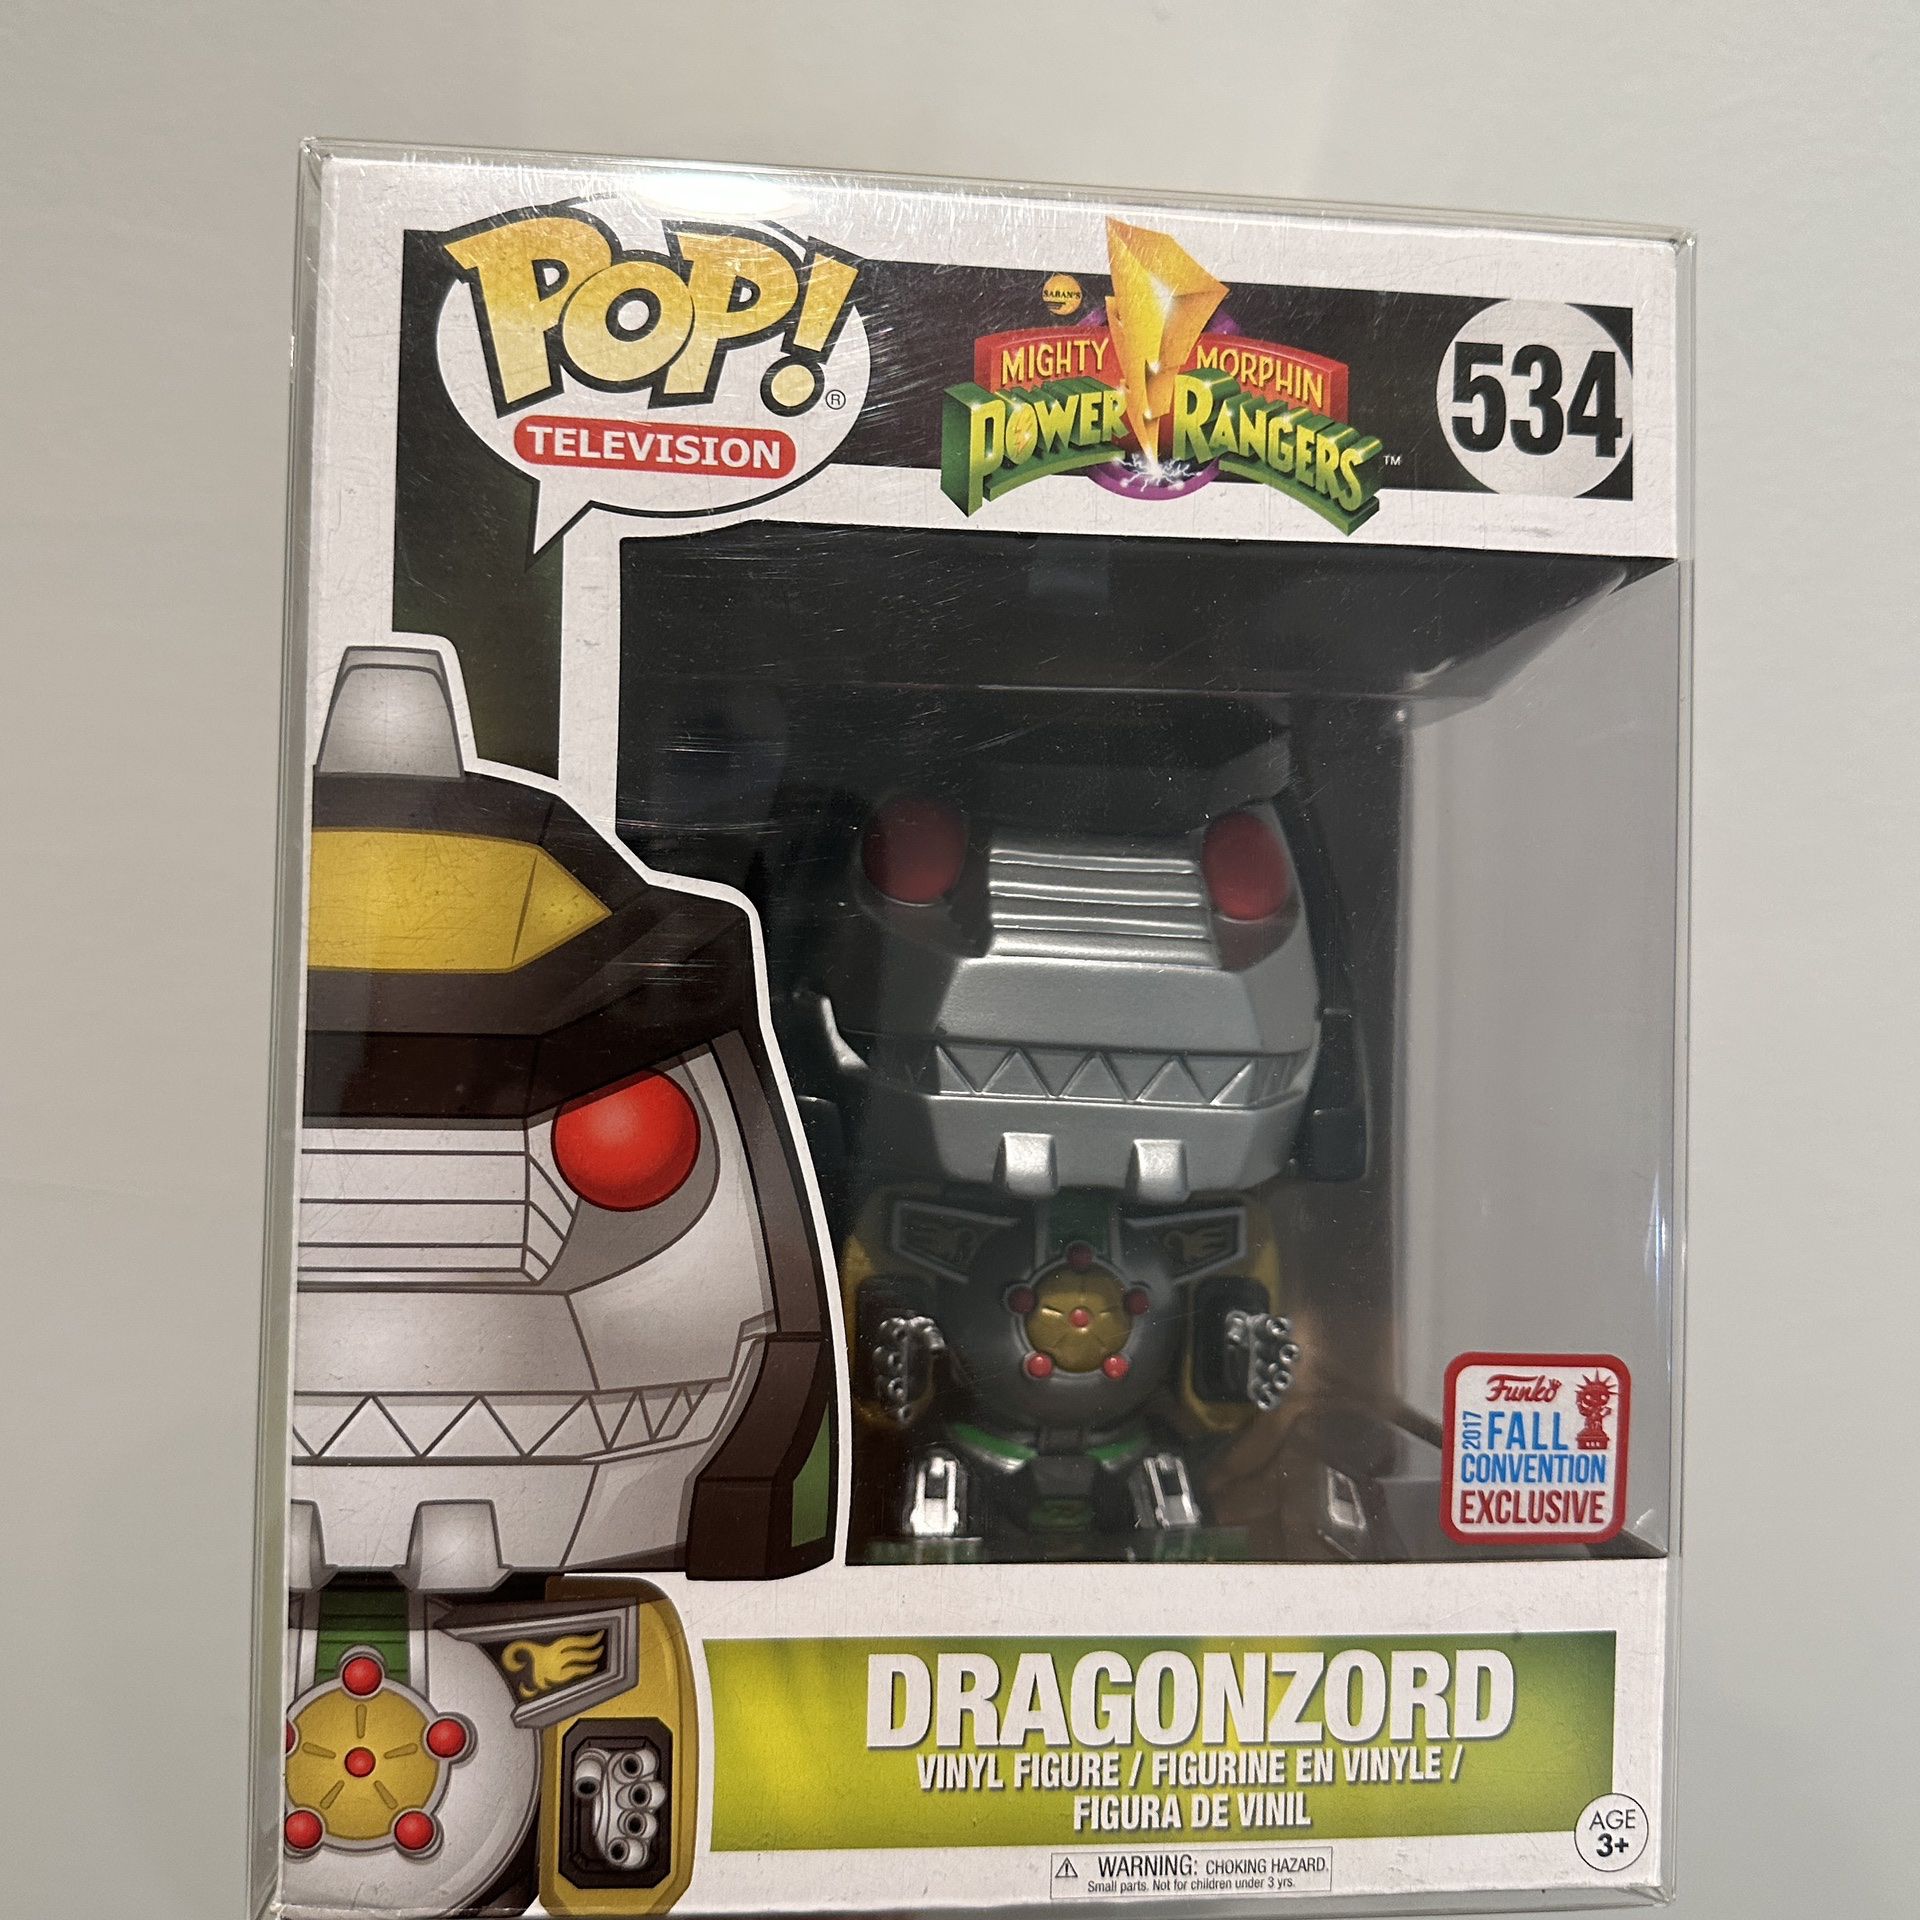 Tablet Onweersbui Circulaire Dragonzord Funko Pop #(contact info removed) Exclusive Power Rangers MMPR  for Sale in Westminster, CA - OfferUp